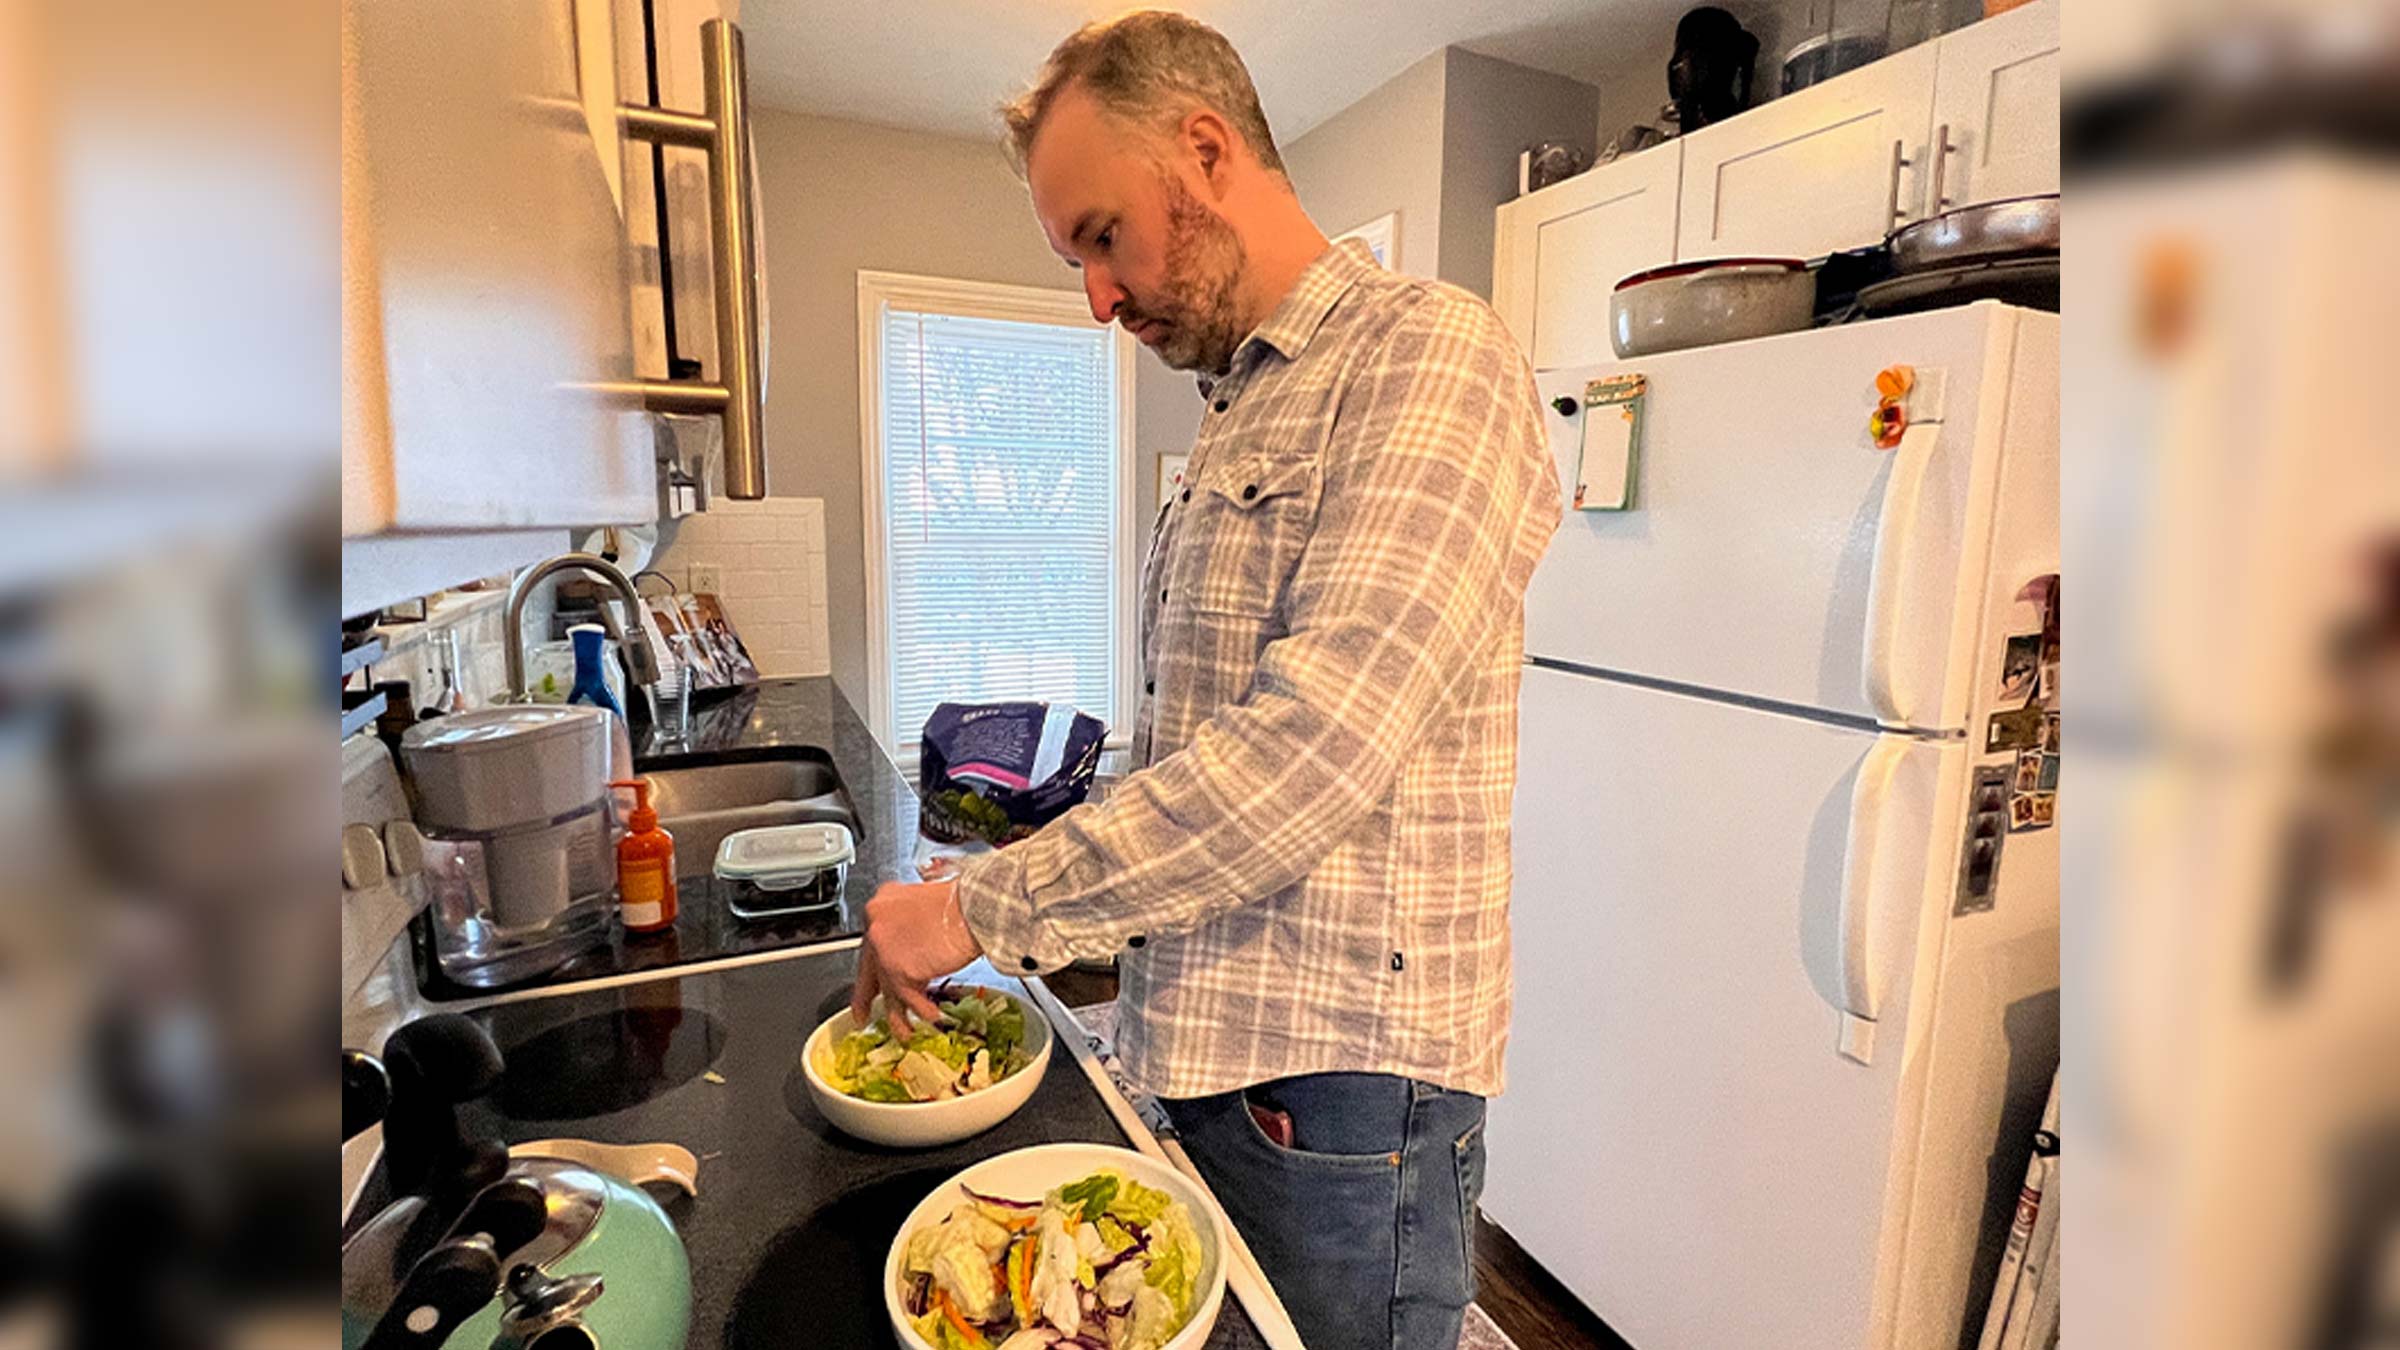 Patient Dave Conway makes a salad in his kitchen